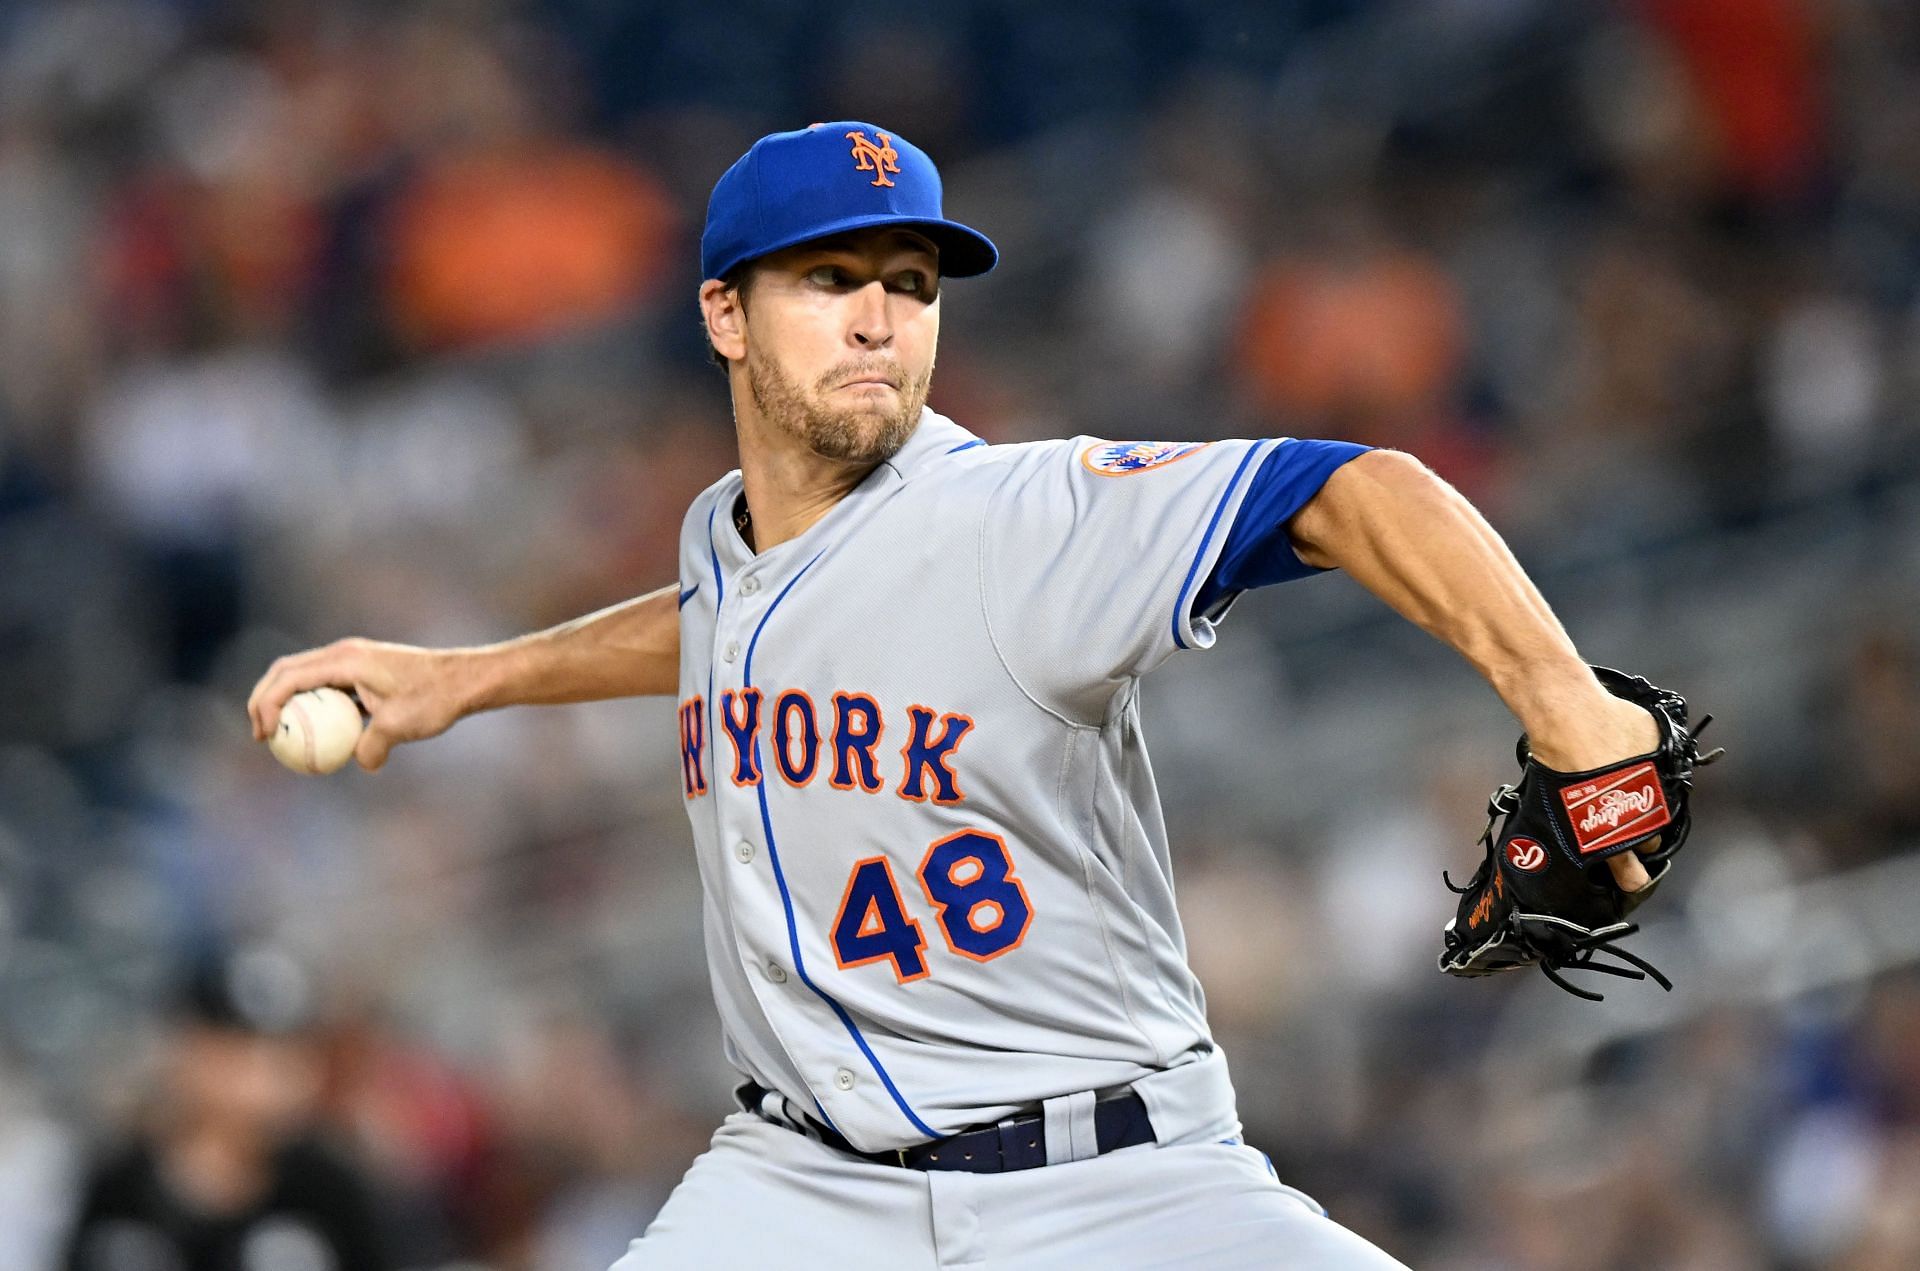 Petition · Get Jacob degrom run support! ·